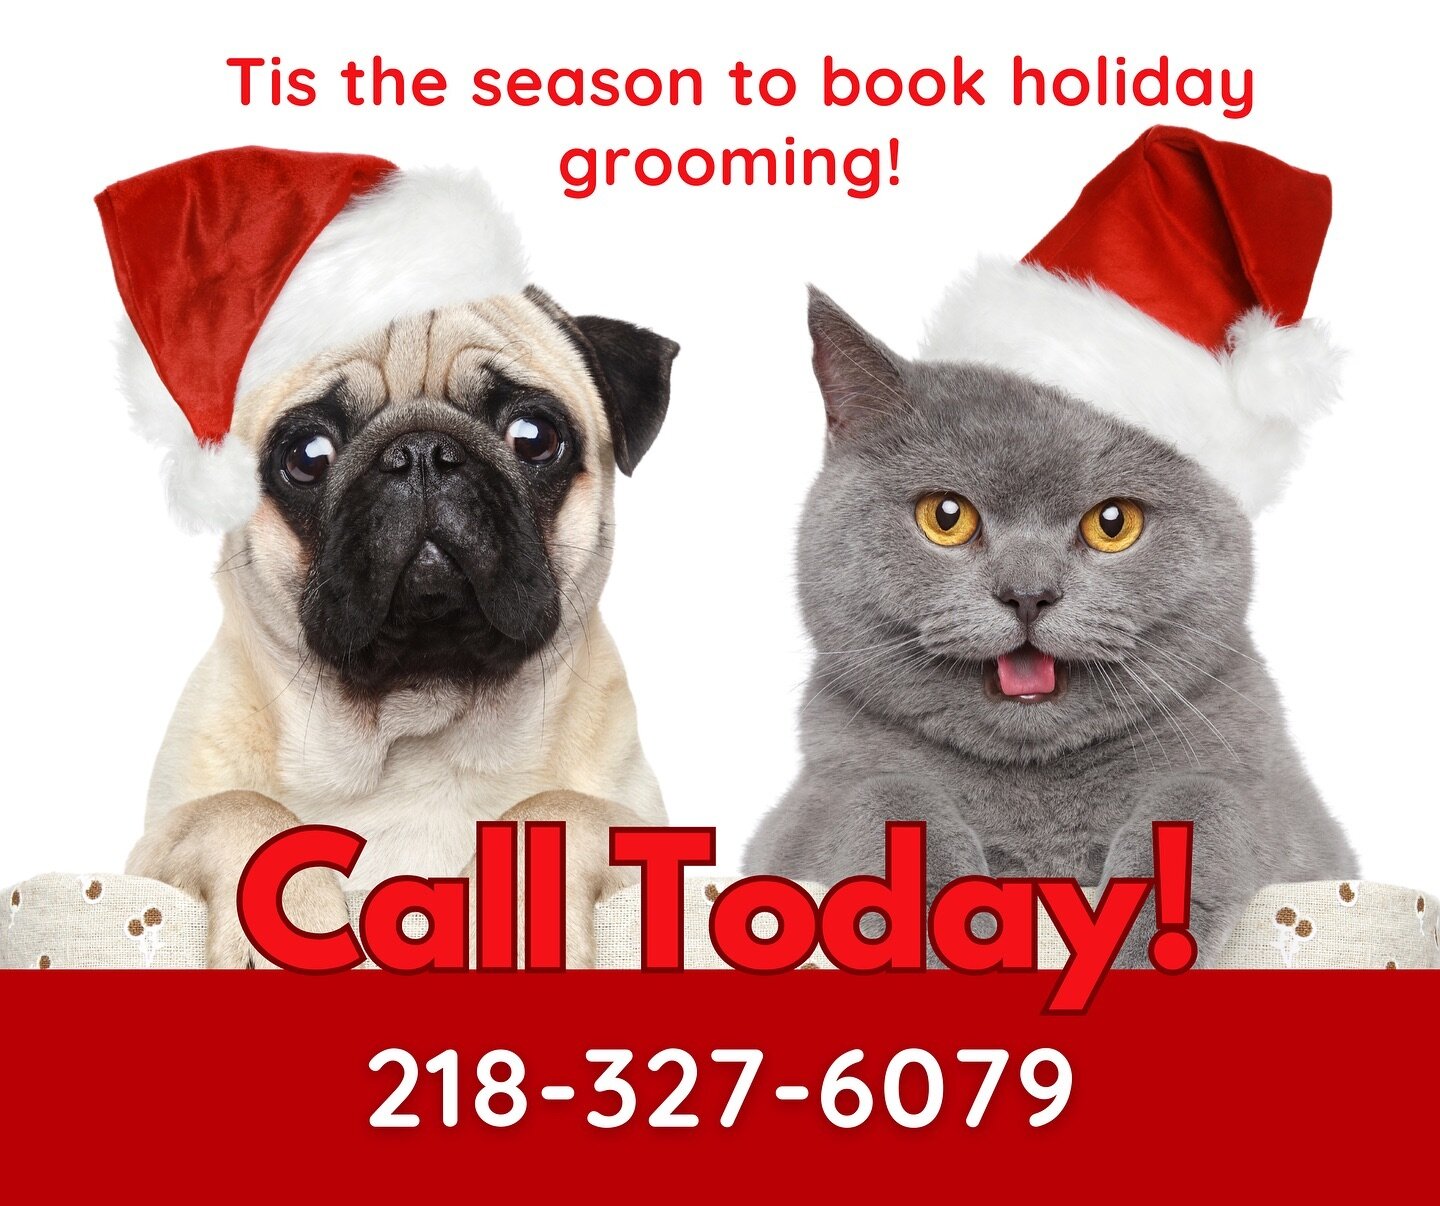 Have the most fabulous looking pet this holiday season! 💅 Slots are already filling up fast so be sure to get your appointment on the books 📖 We groom both dogs and cats 🐾